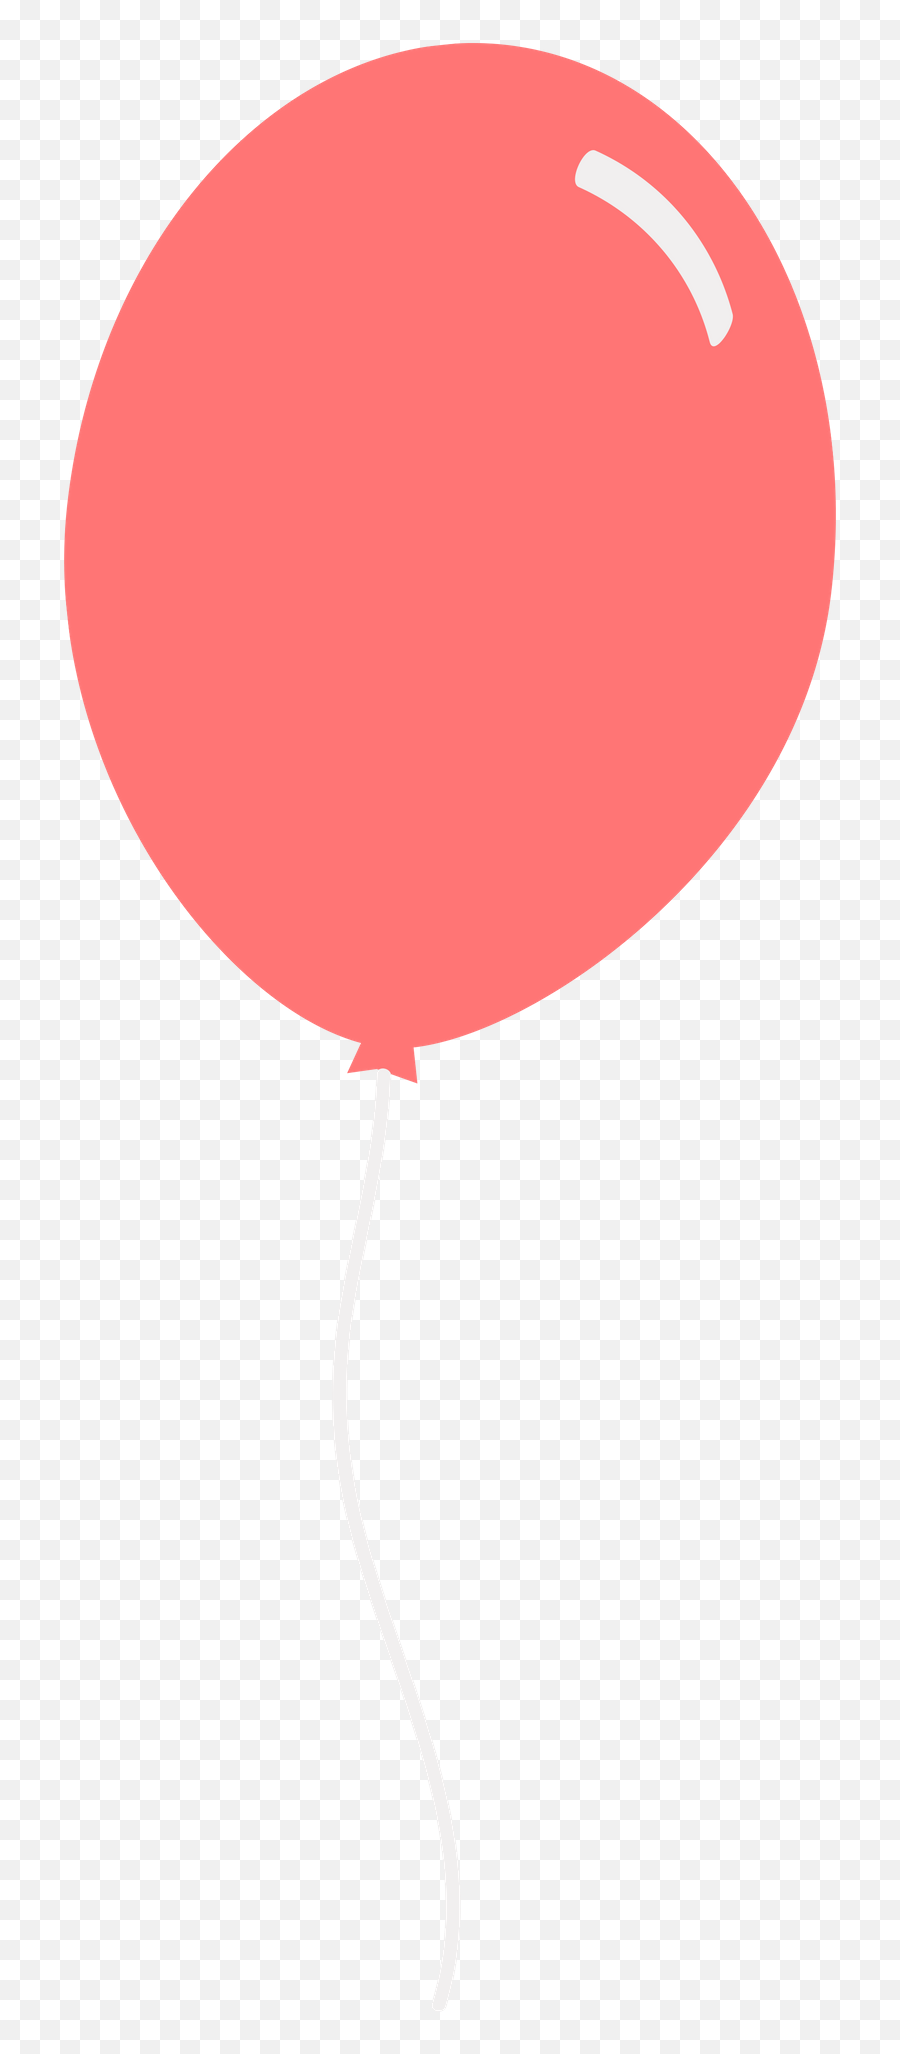 Balloon Png Picture - Balloon,Balloon Png